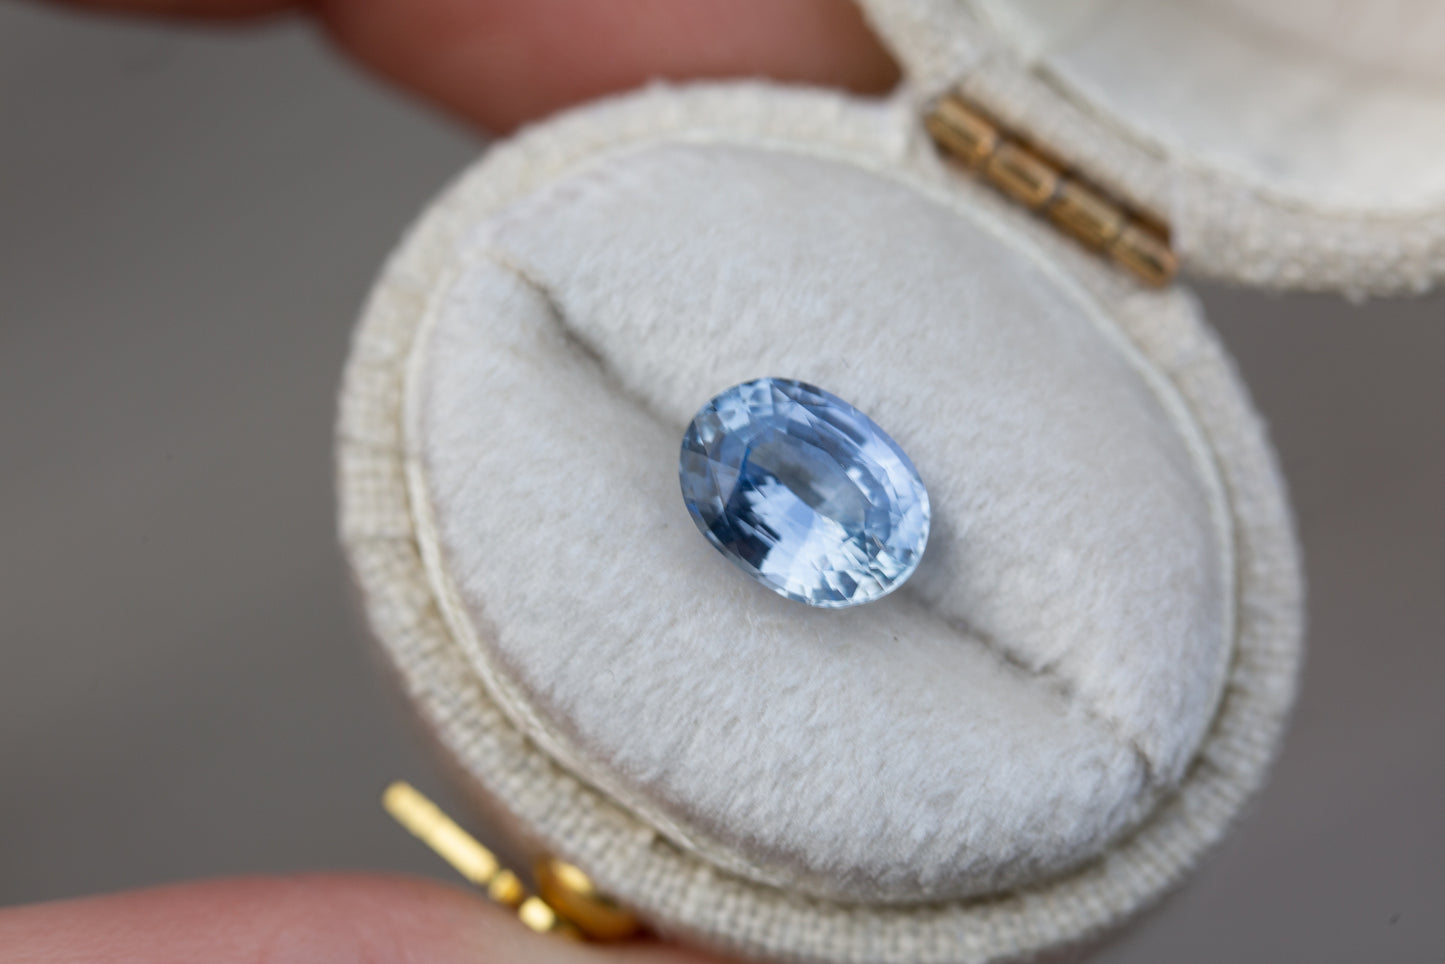 Load image into Gallery viewer, 2.02ct oval powder blue periwinkle sapphire
